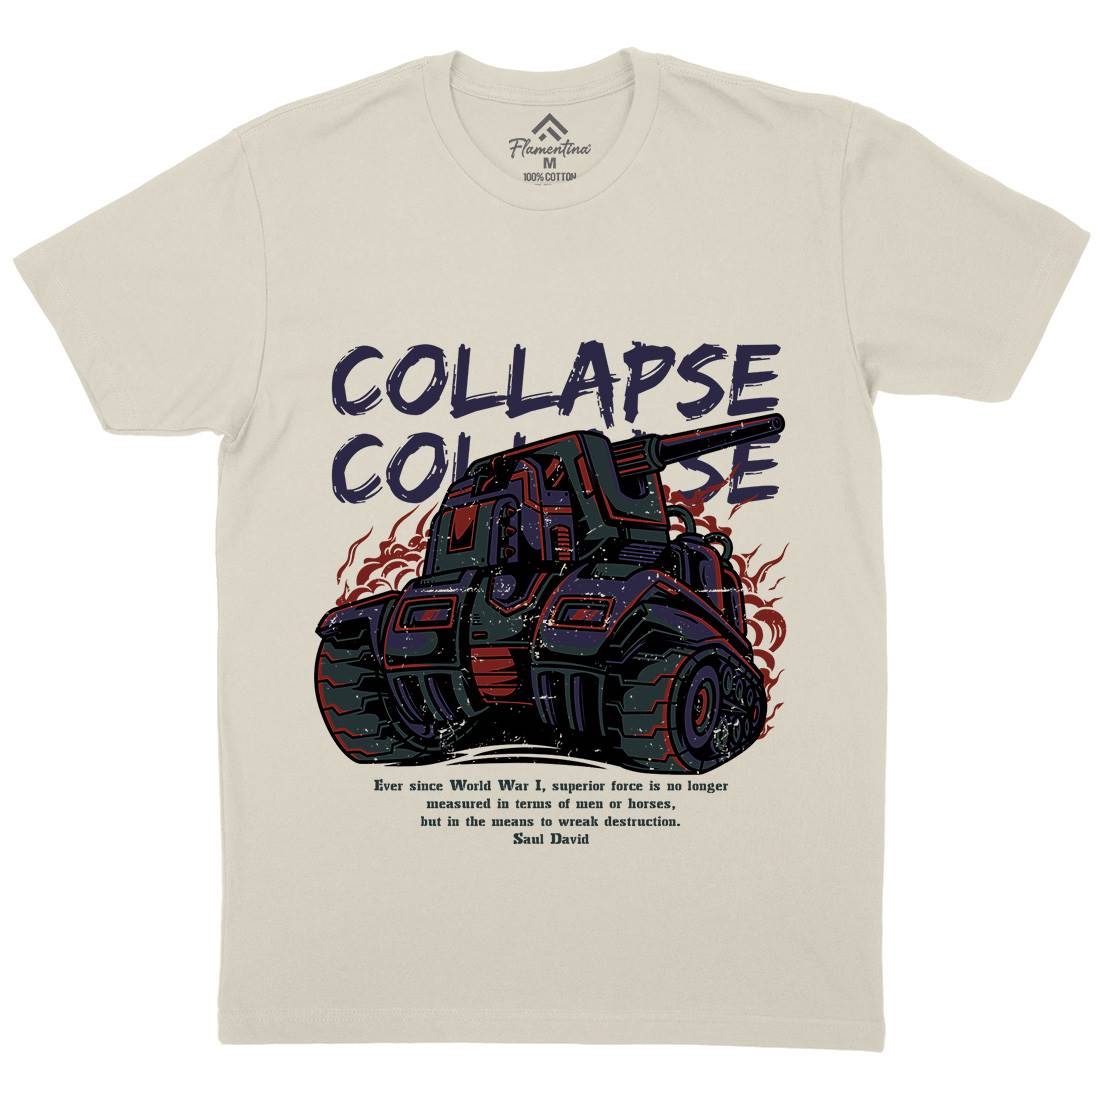 Collapse Mens Organic Crew Neck T-Shirt Army D728